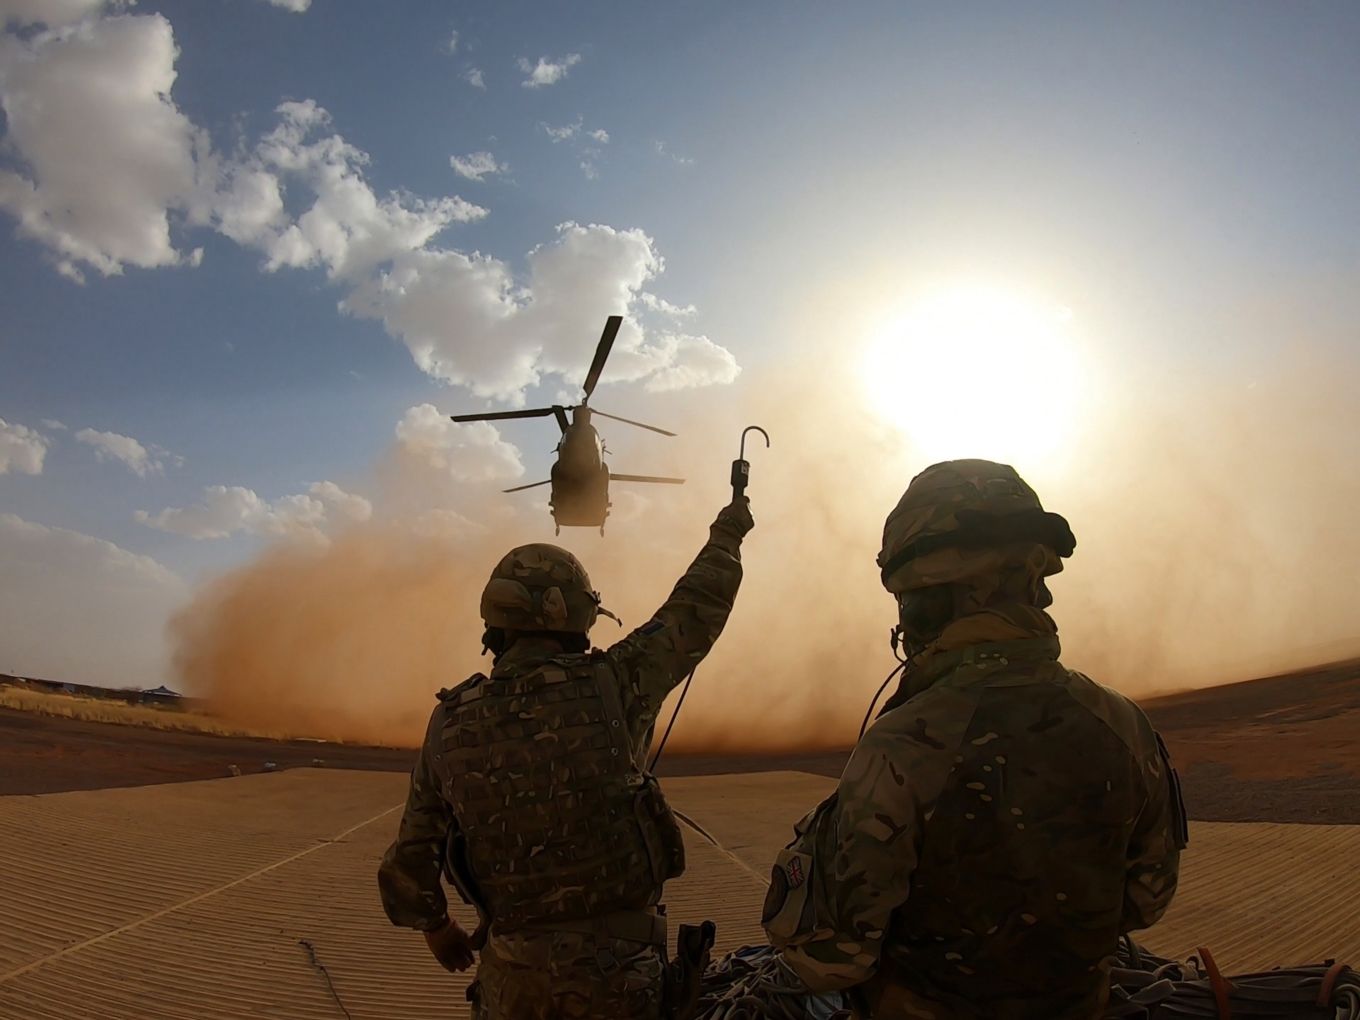 Personnel with hooks as Chinook hovers ahead and stirs up sand.